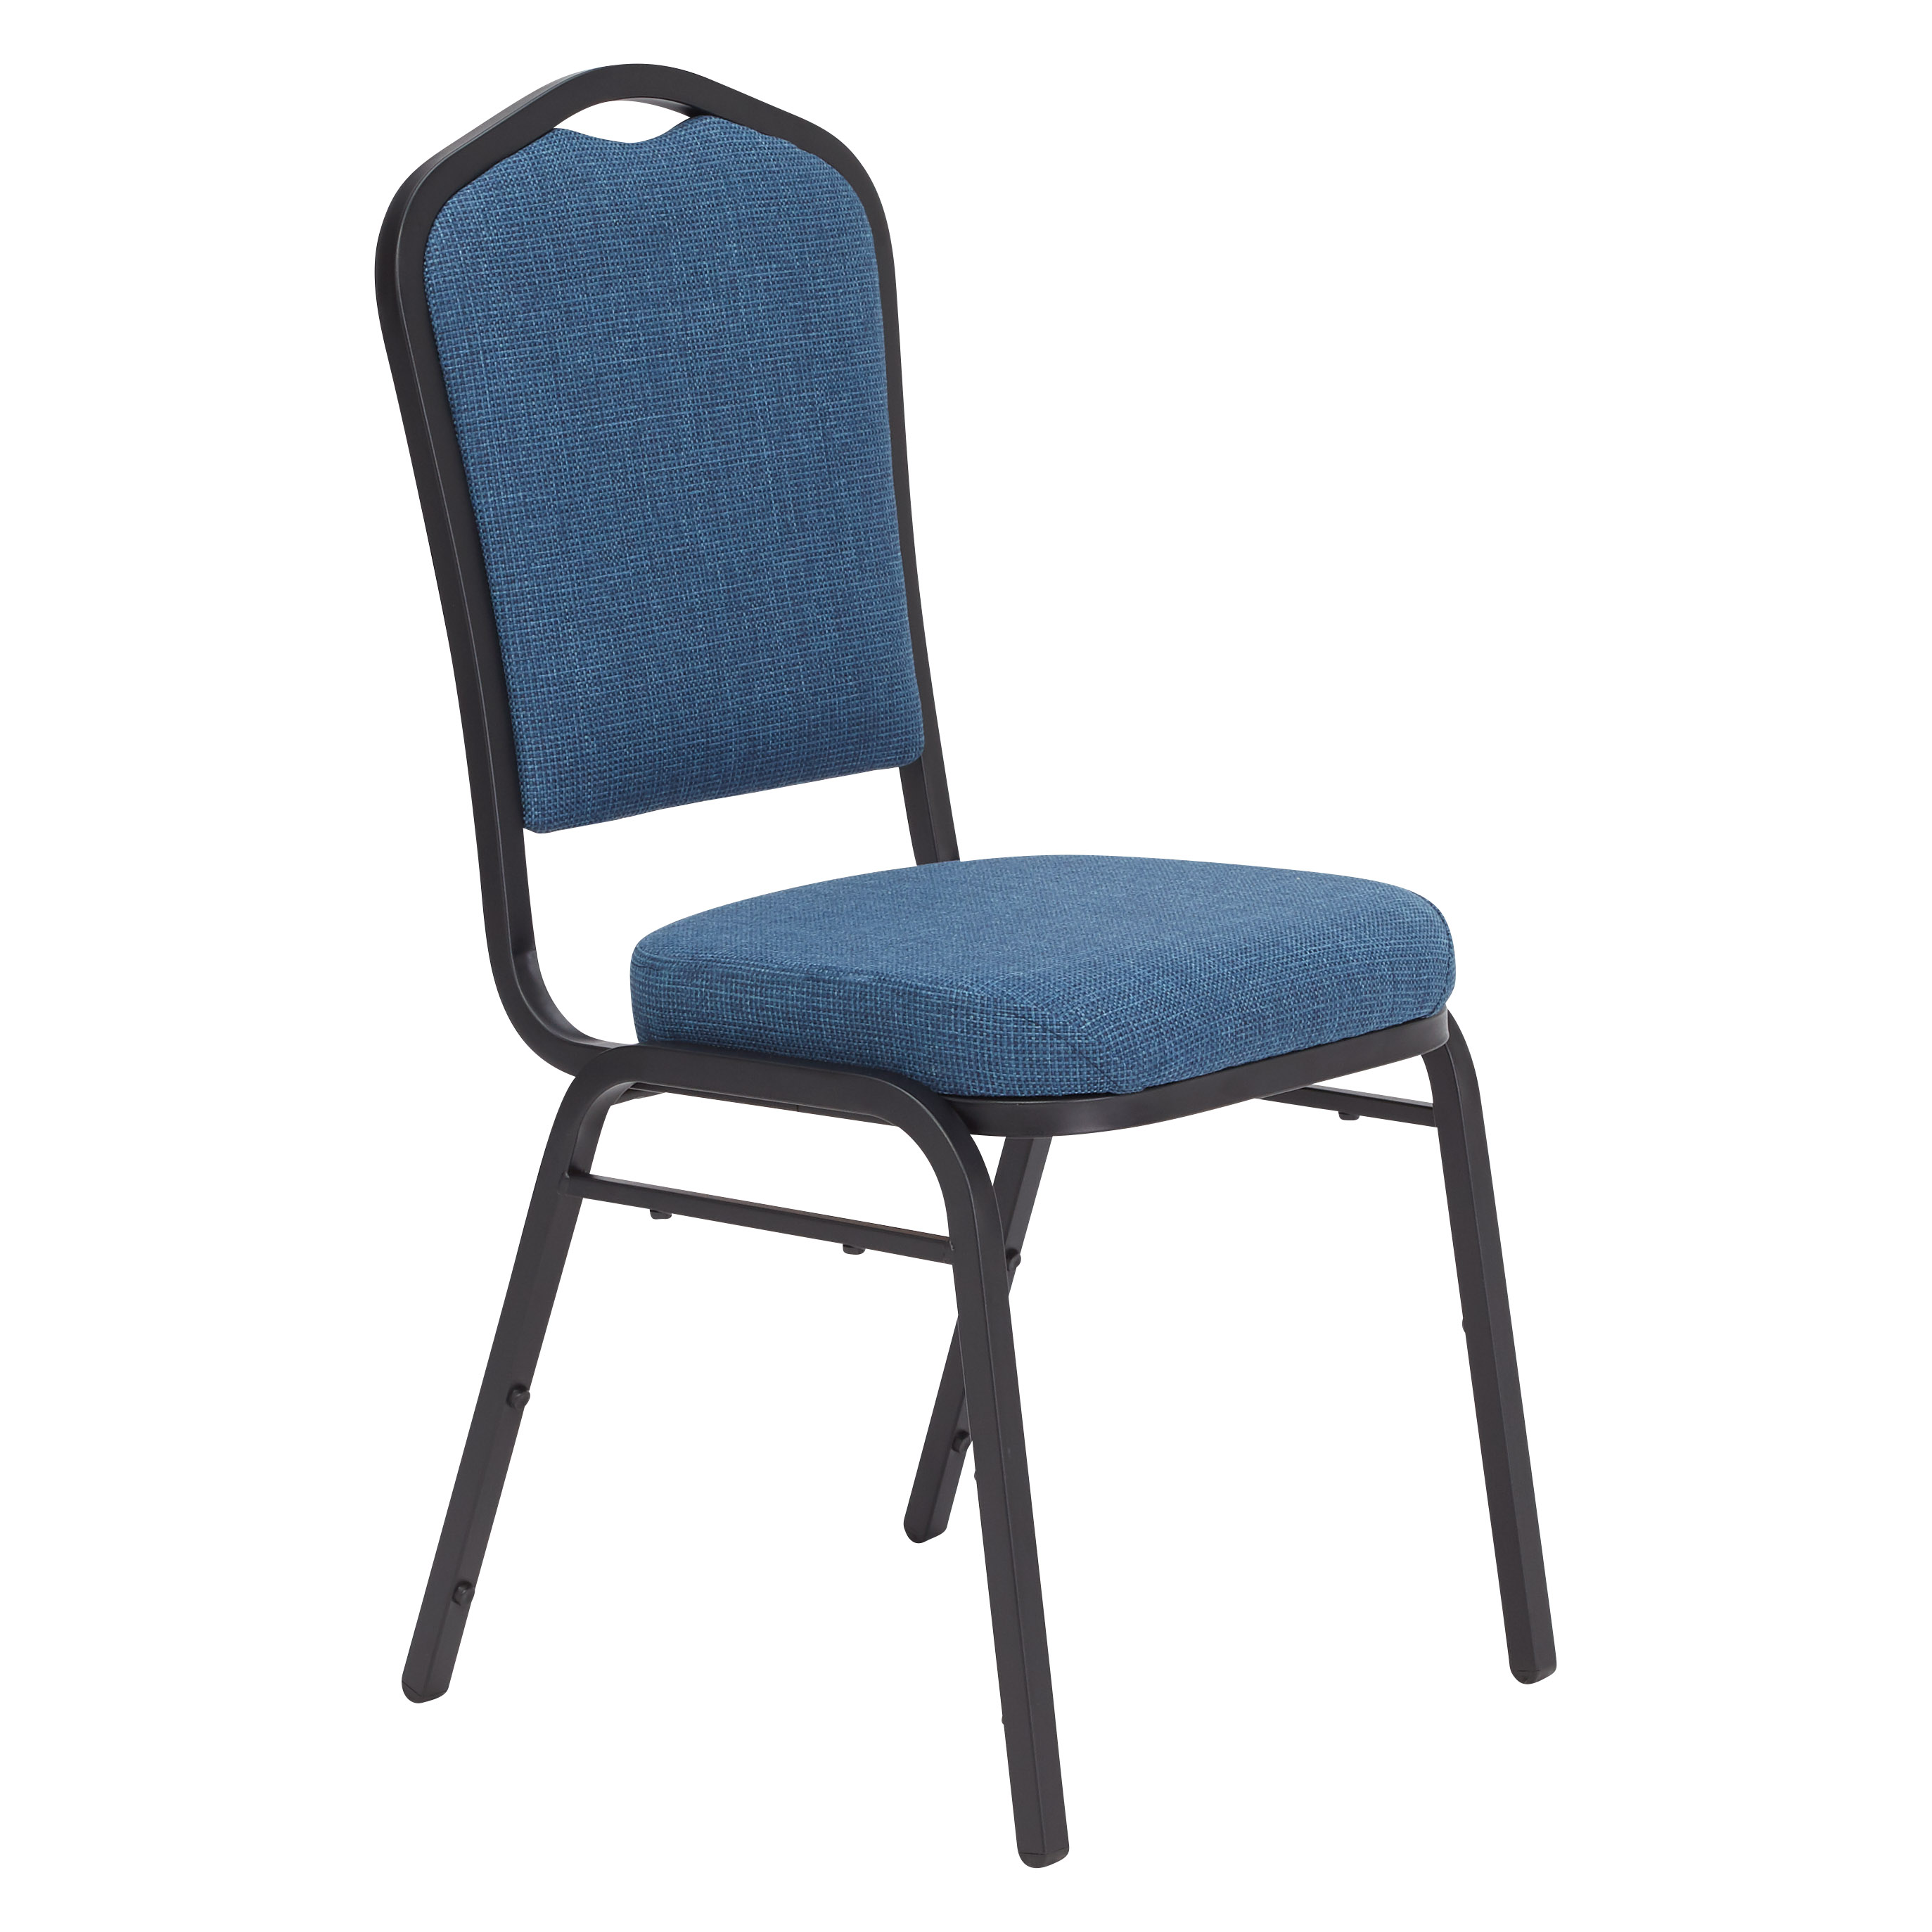 NPS 9374 Natural Blue Fabric Black Frame Silhouette Stack Chair